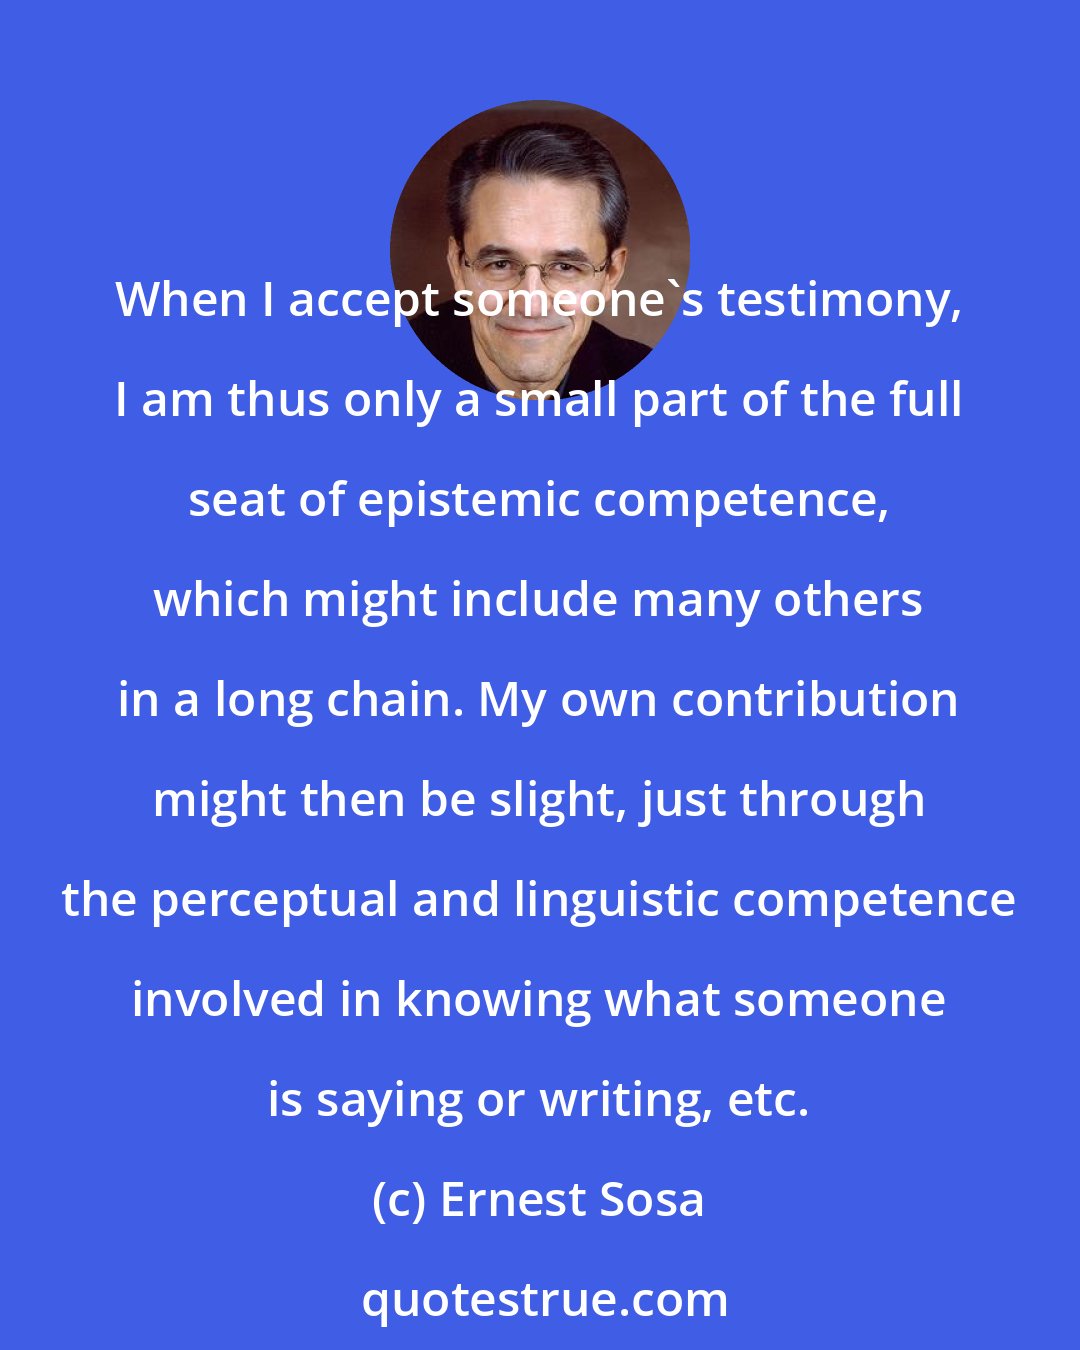 Ernest Sosa: When I accept someone's testimony, I am thus only a small part of the full seat of epistemic competence, which might include many others in a long chain. My own contribution might then be slight, just through the perceptual and linguistic competence involved in knowing what someone is saying or writing, etc.